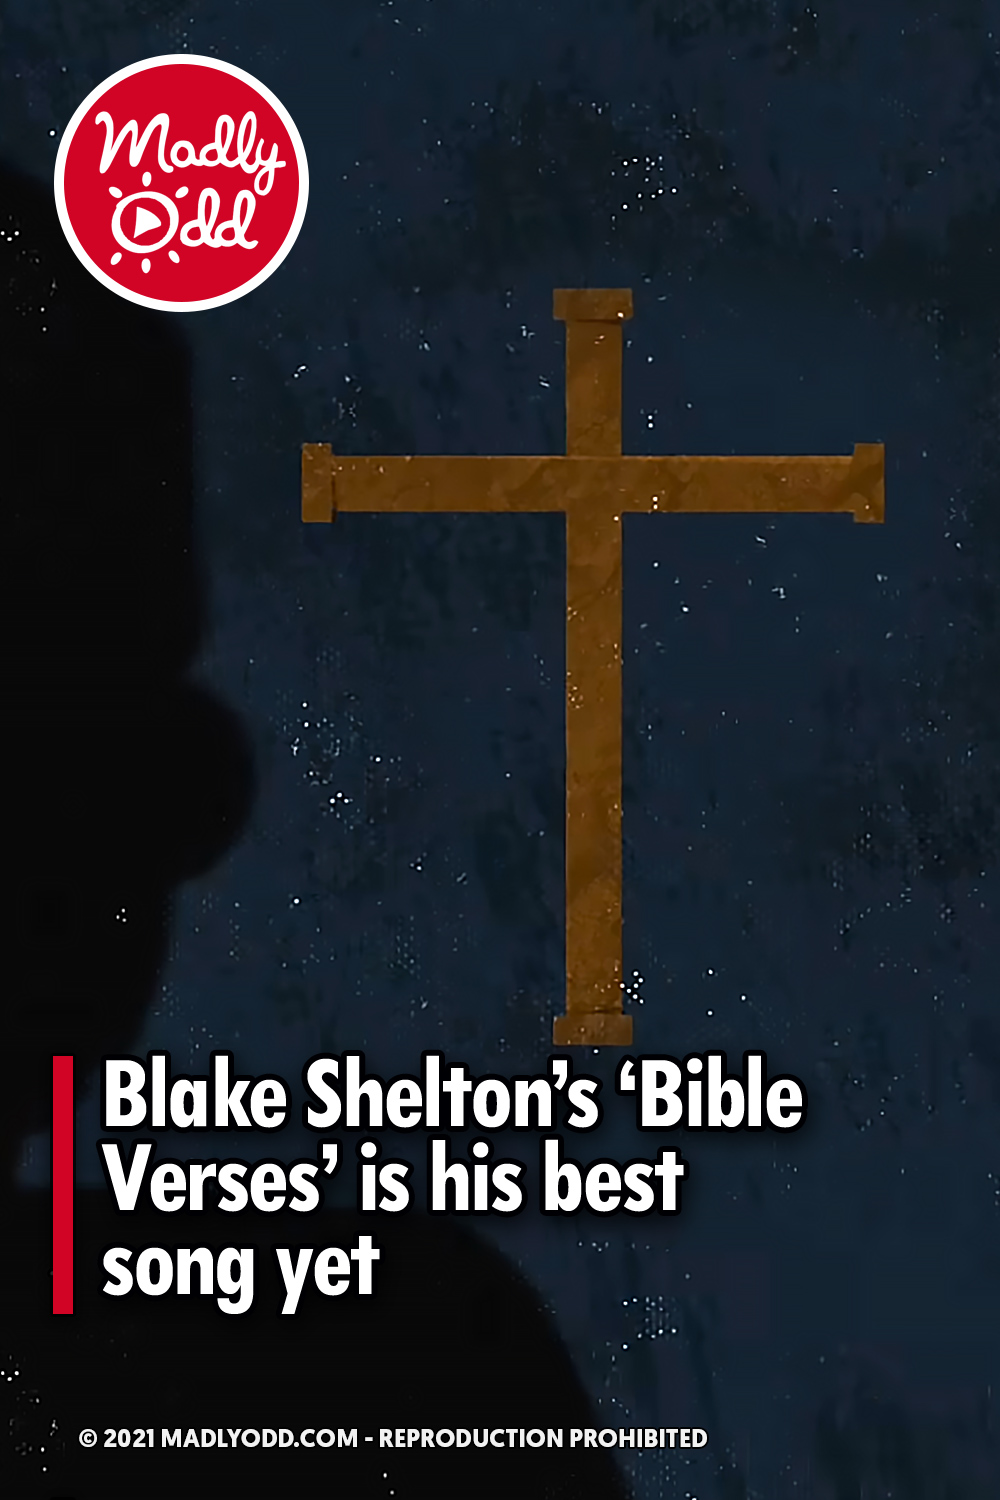 Blake Shelton’s ‘Bible Verses’ is his best song yet